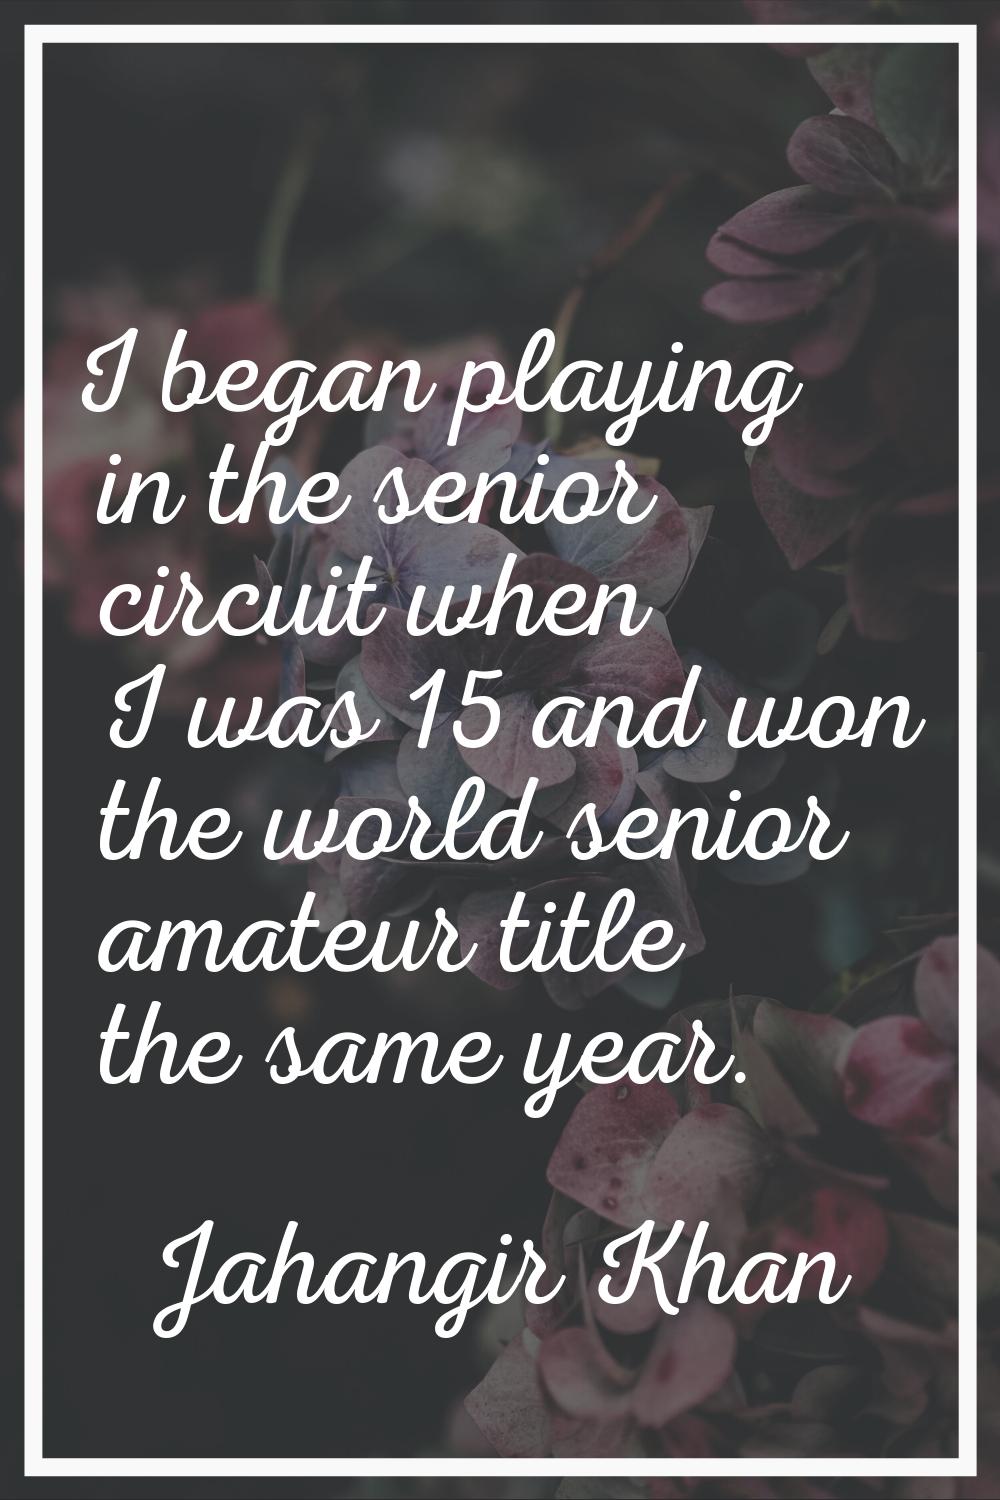 I began playing in the senior circuit when I was 15 and won the world senior amateur title the same